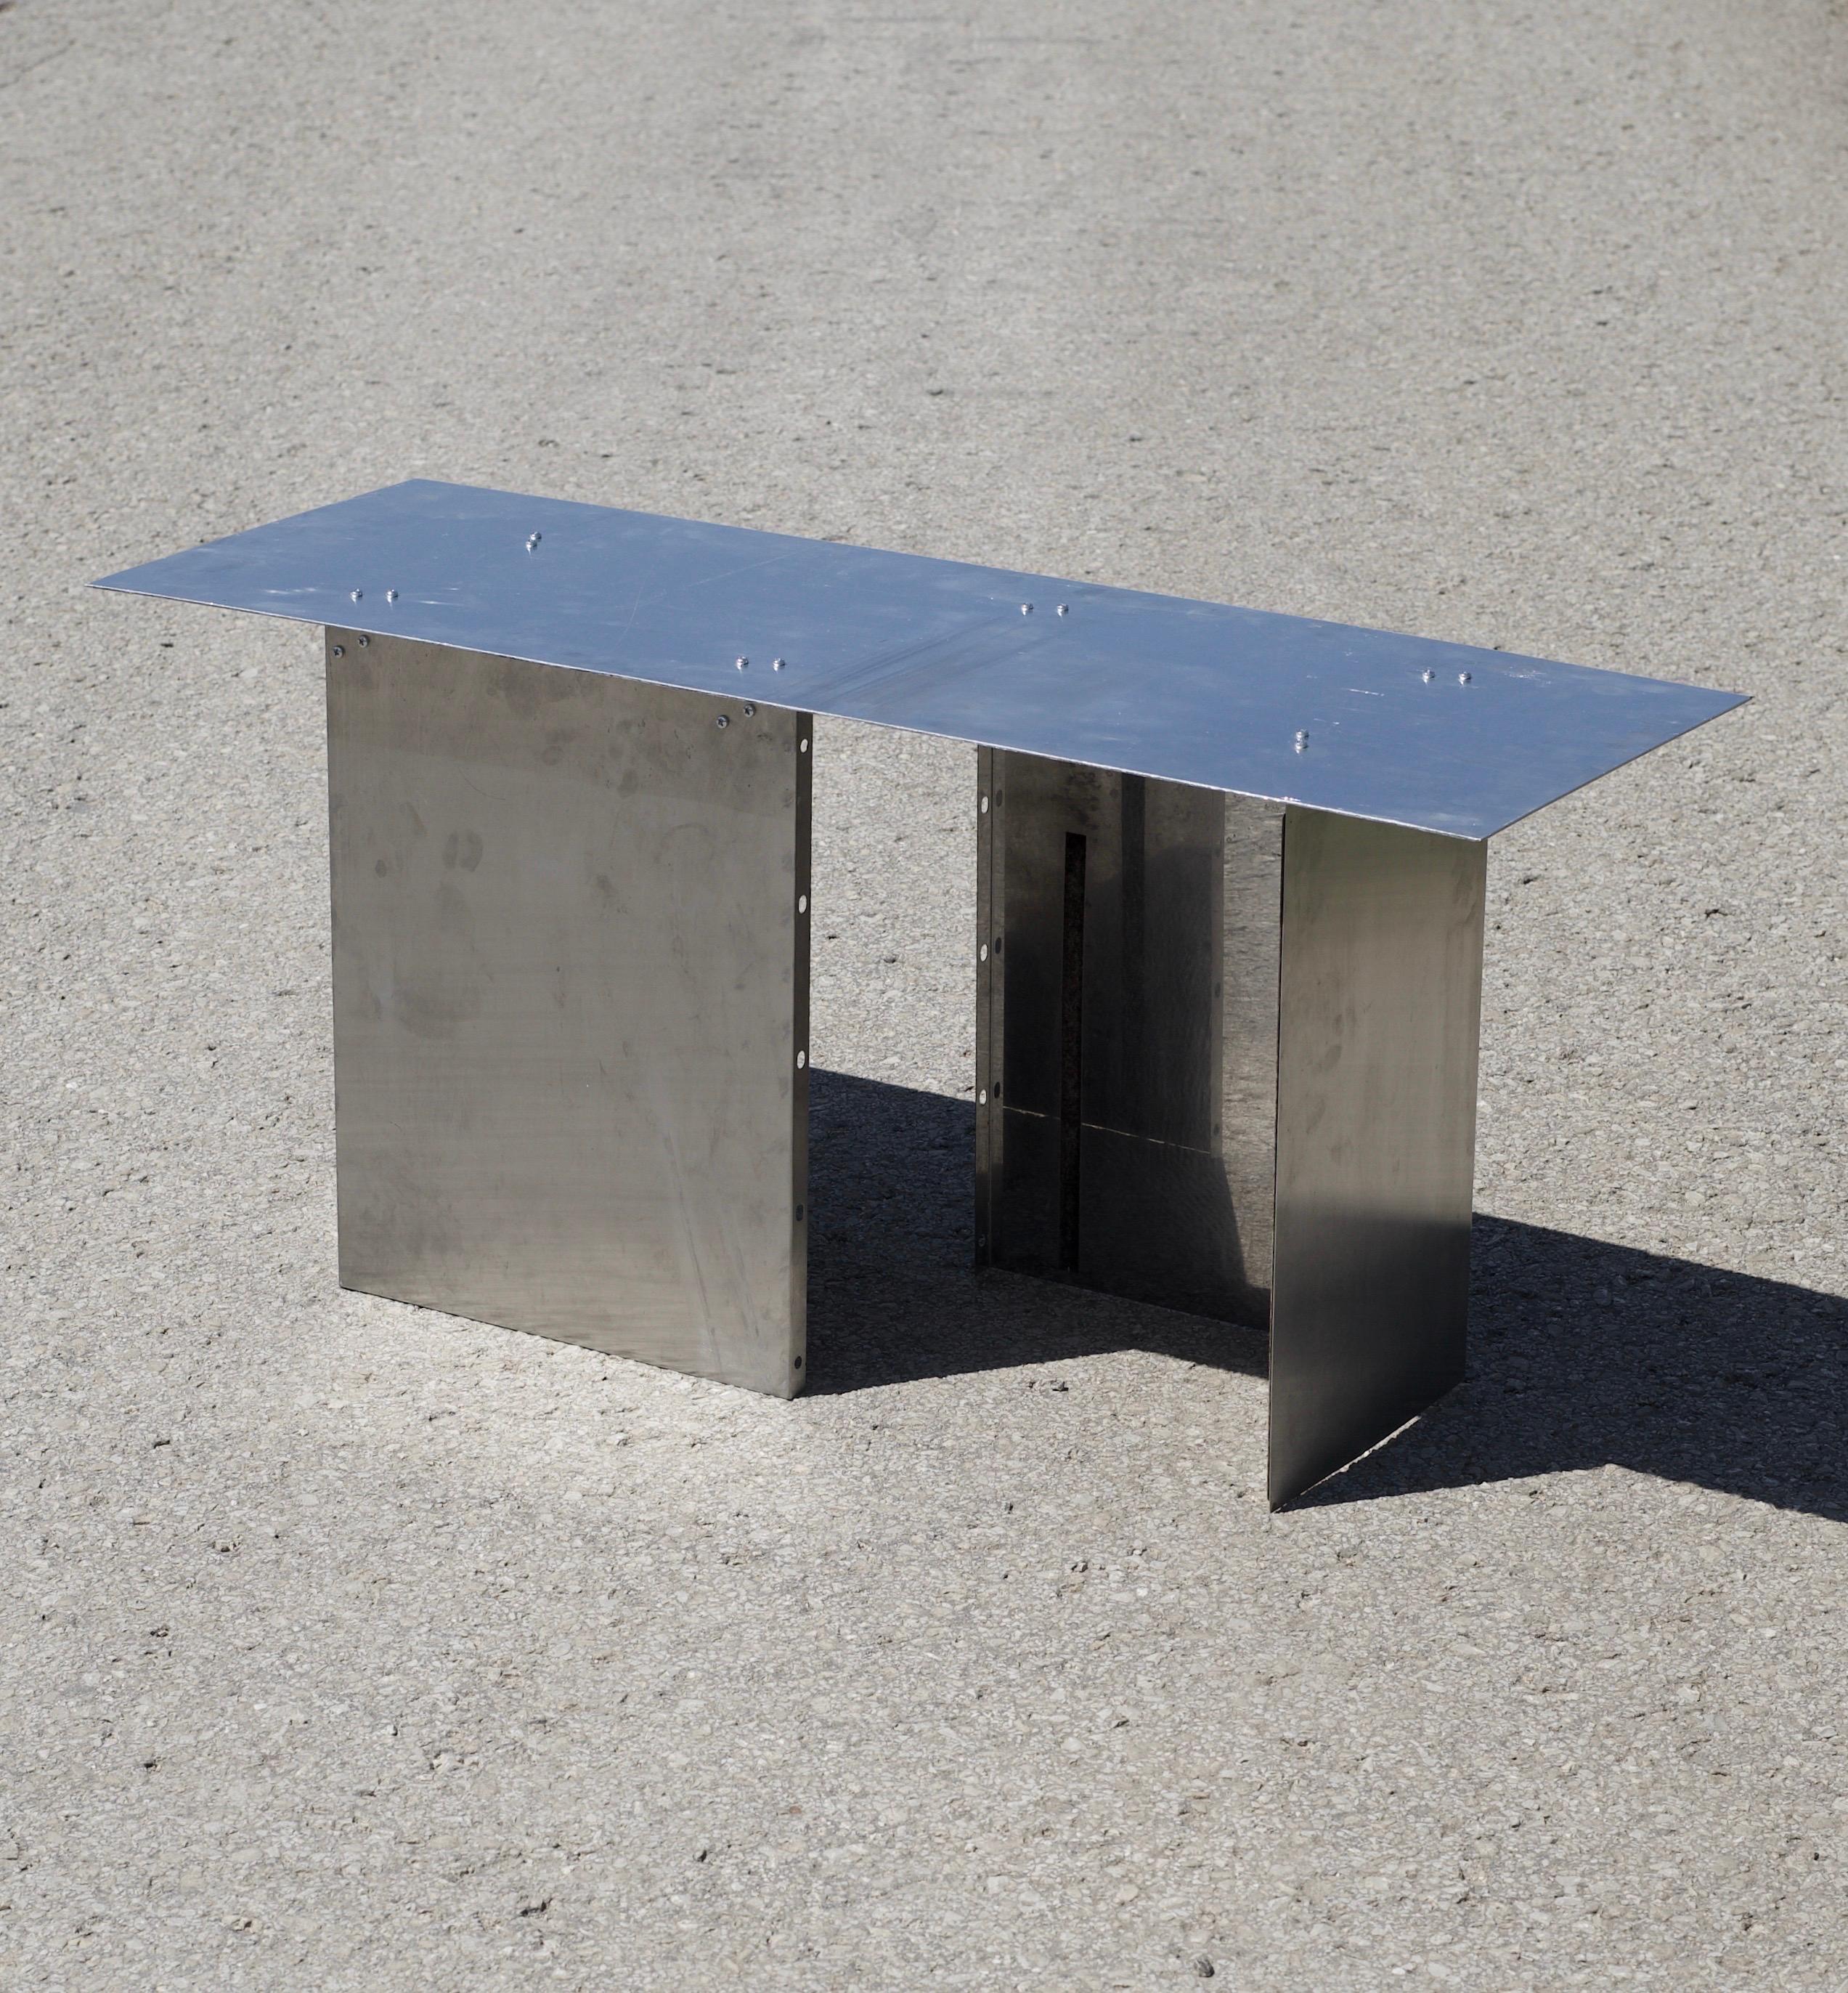 ‘S0-2H’ lounge table by Maximilian Hofmann
Dimensions: D 40, W 100, H 45 cm
Materials: aluminium.
Finish: rolled and polished aluminium.
Weight: 9.8 kg. 
Material thickness: 0.4 cm

‘S0-2H’ lounge table from the Undigested collection by